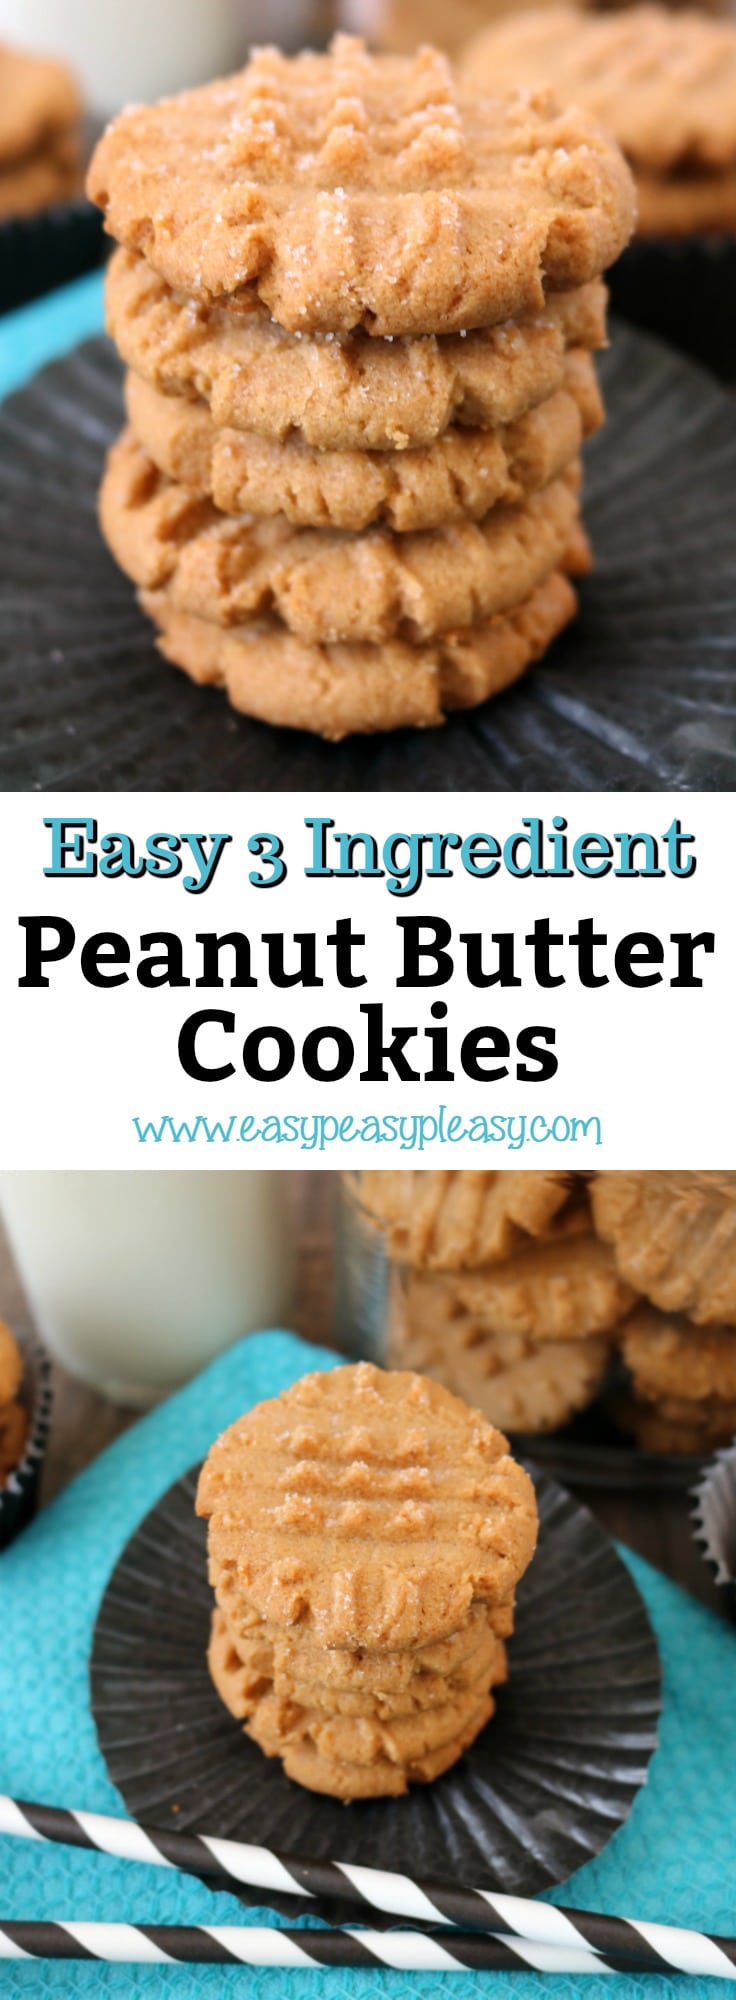 Satisfy your sweet tooth with these quick and easy 3 Ingredient Peanut Butter Cookies.